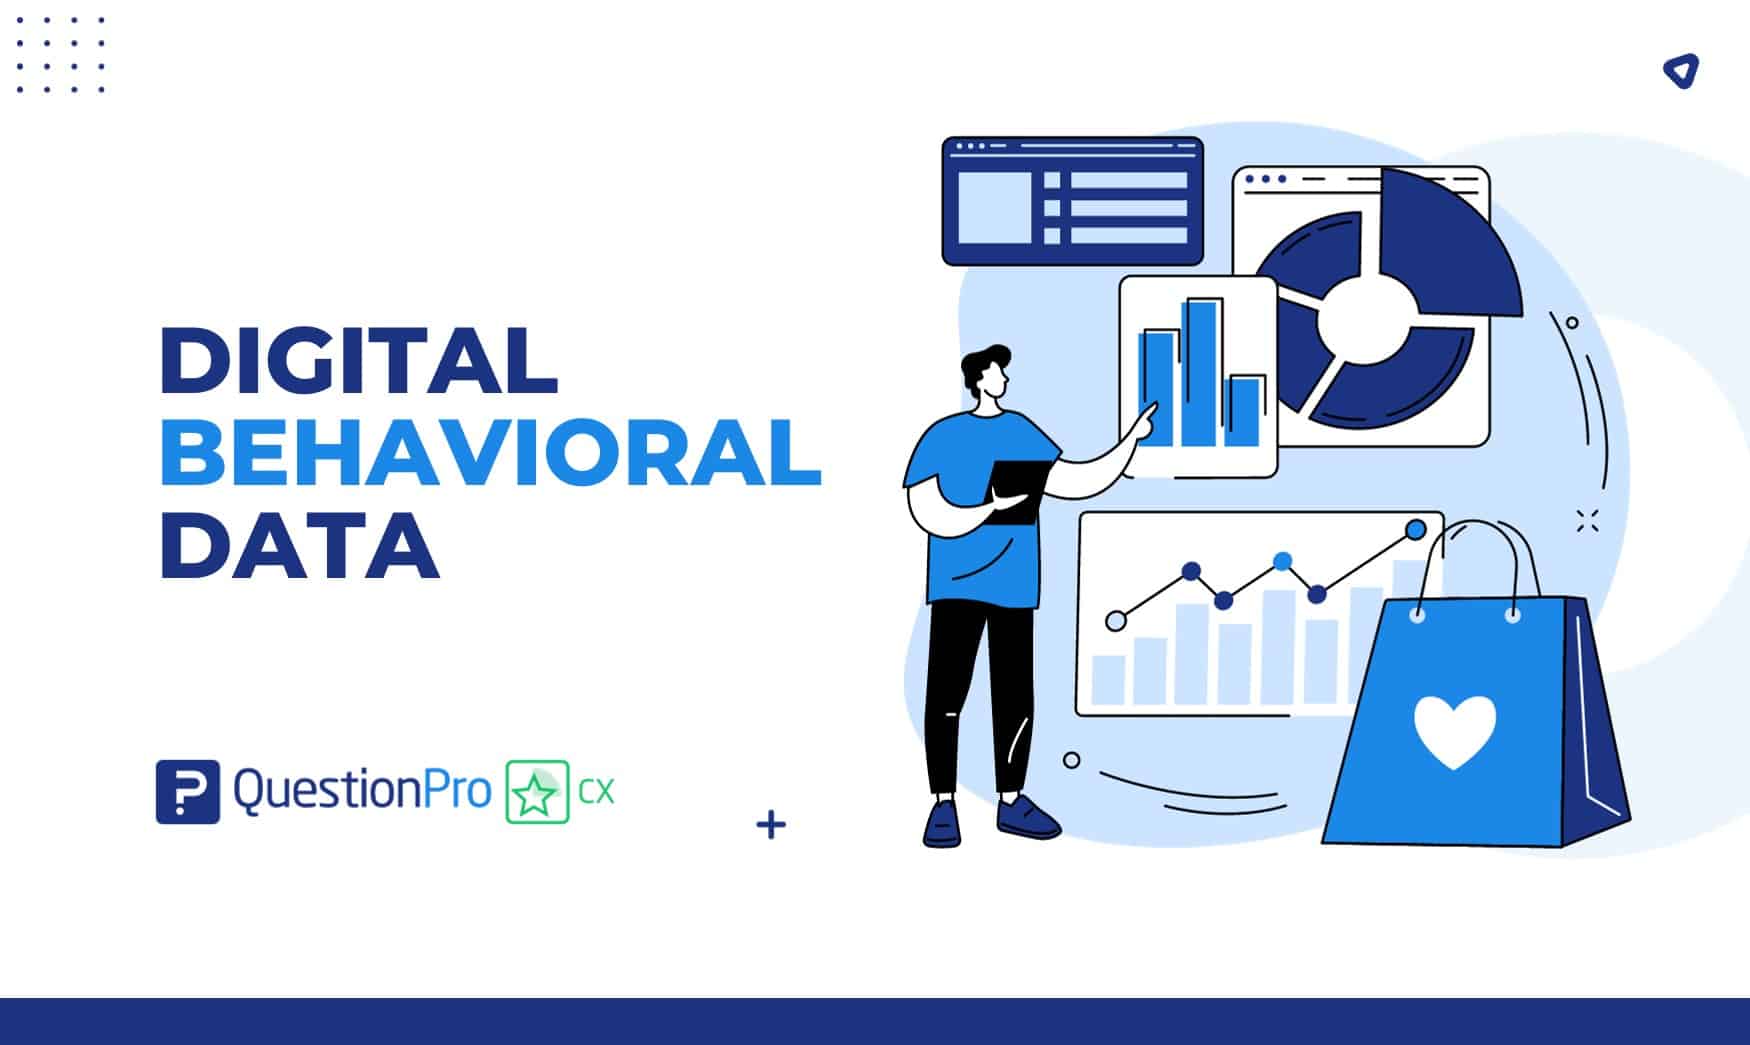 Digital Behavioral Data is the massive collection of user interactions and behaviors across various digital platforms. Learn more.